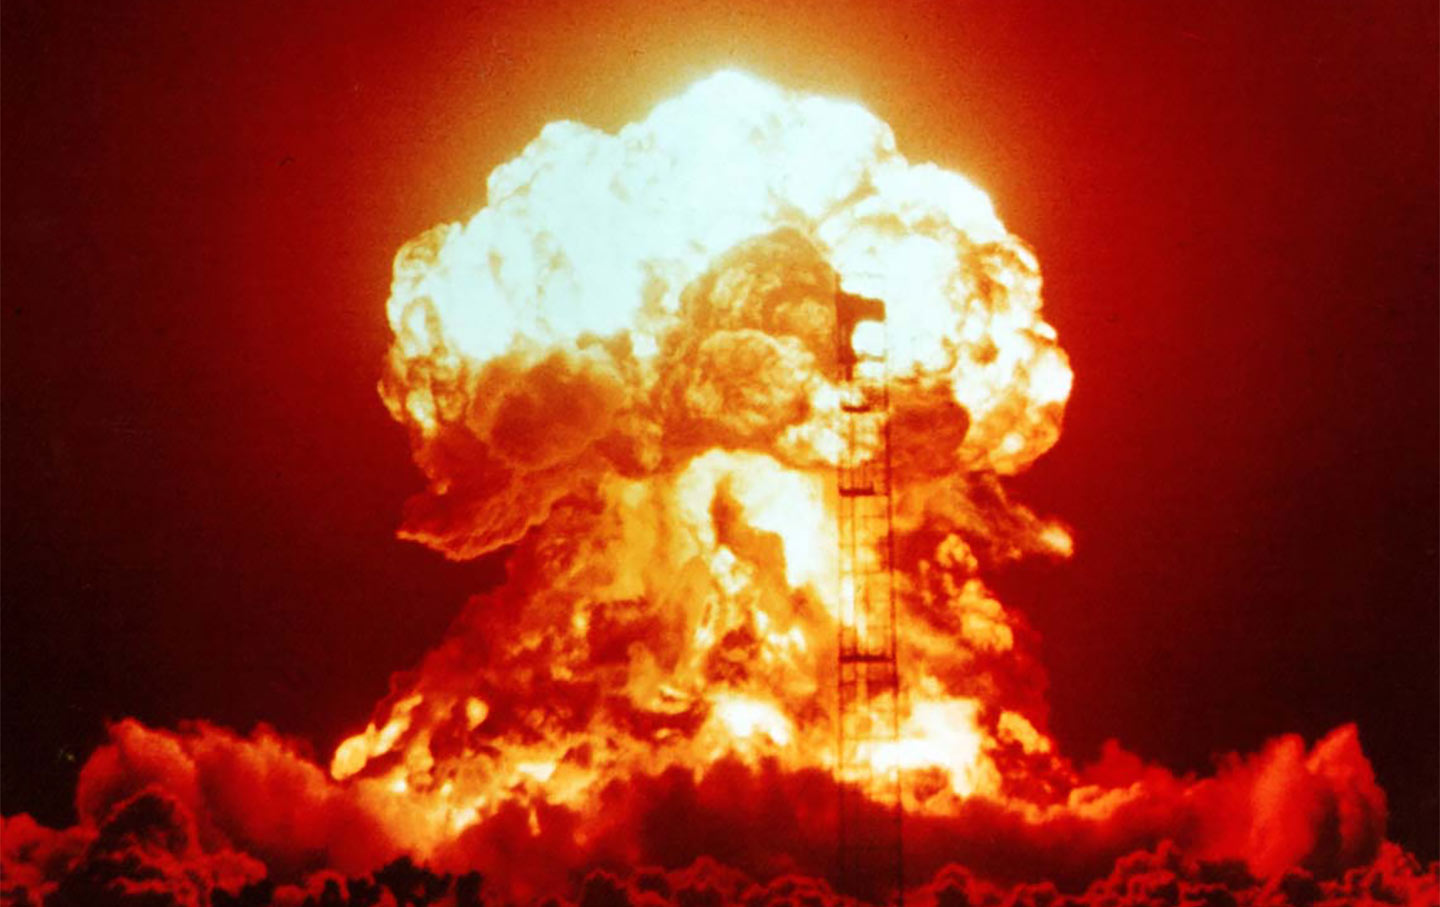 This nuclear explosion was conducted at the Nevada Test Site in 1953.